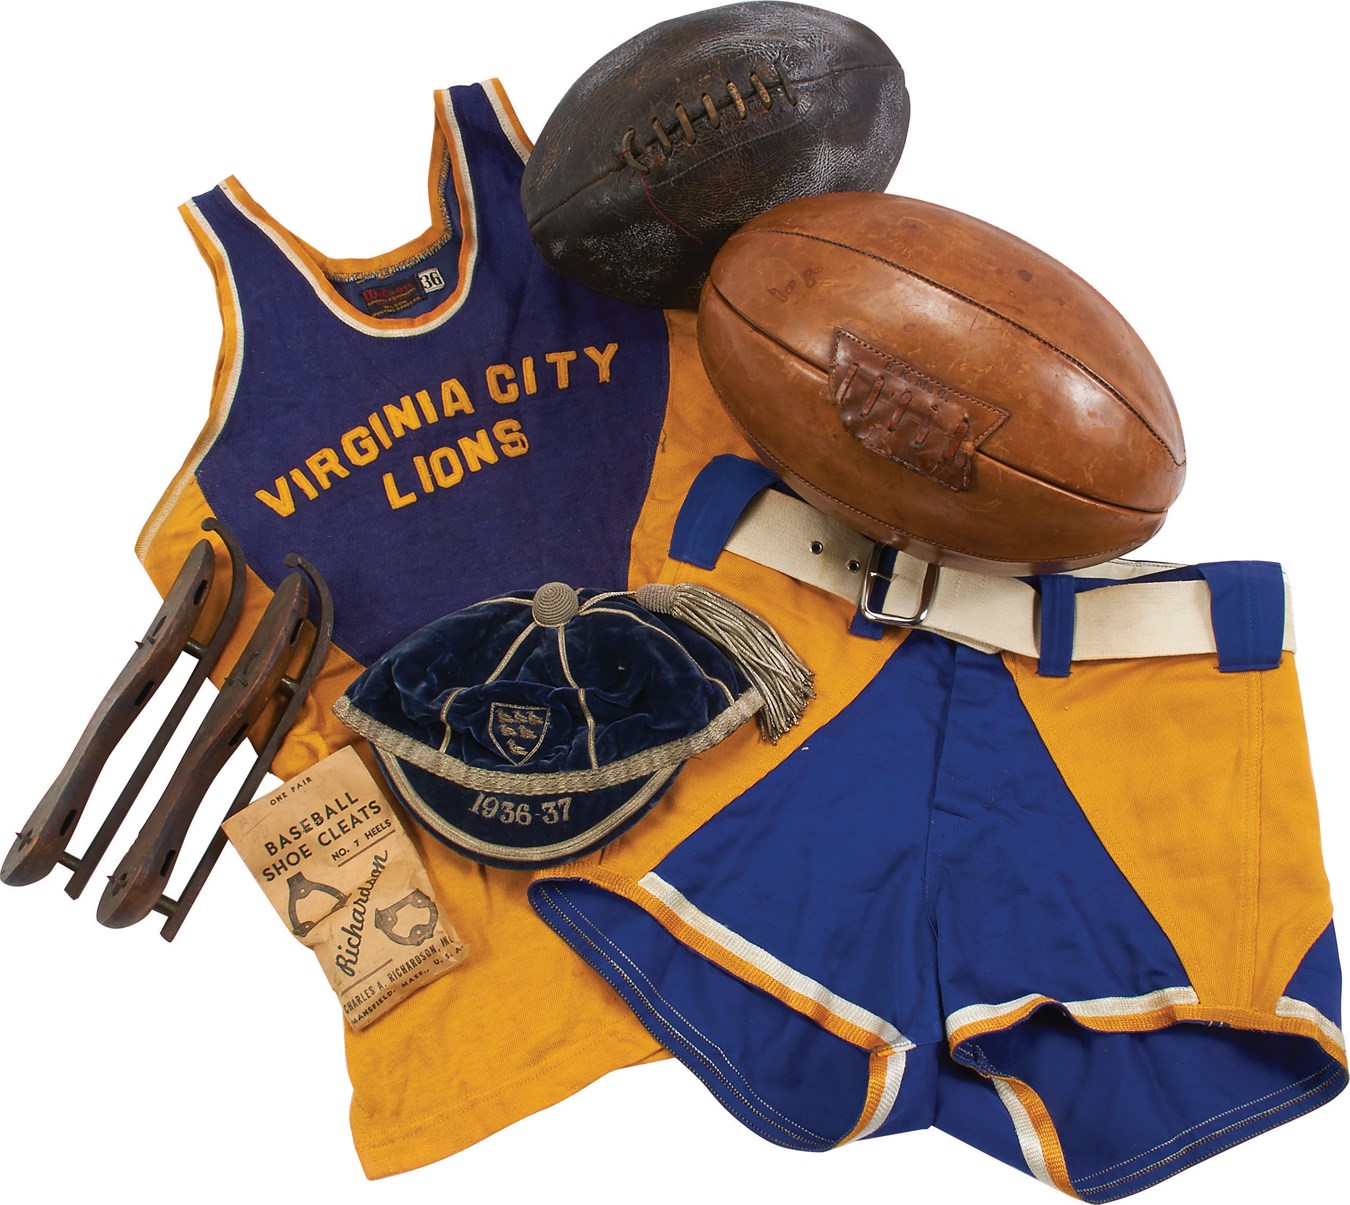 Antique and Vintage Sports Equipment and Memorabilia - 169 For